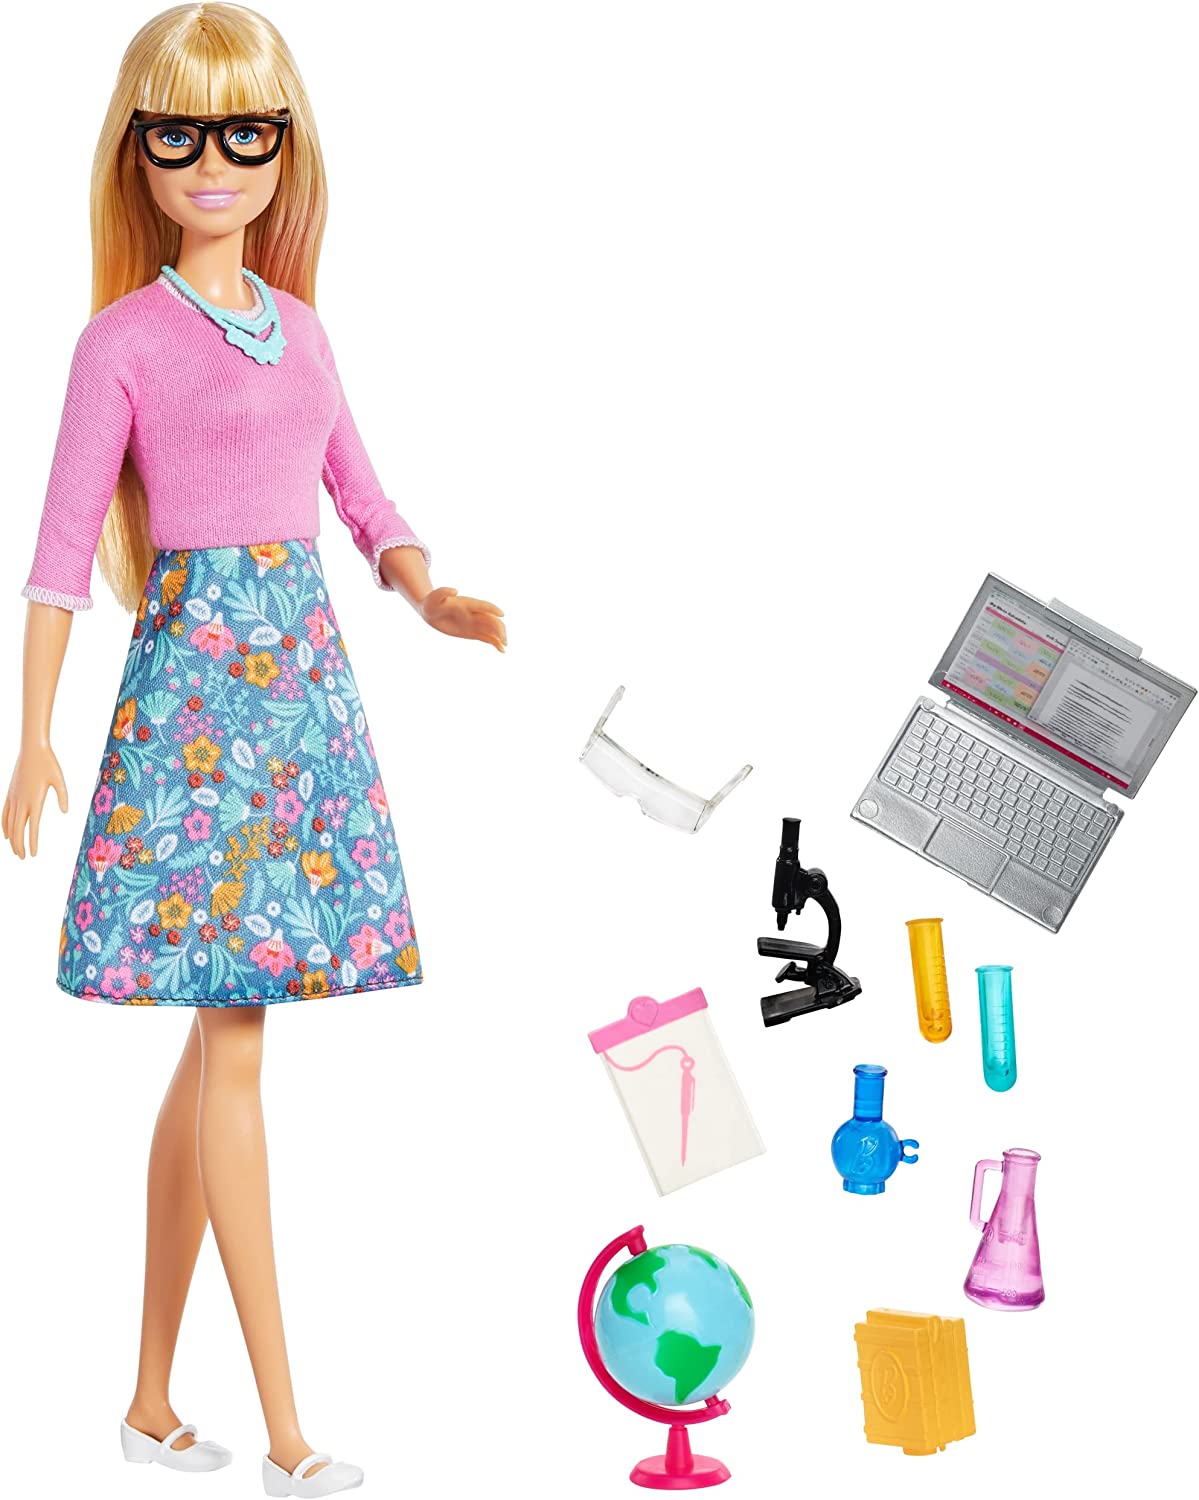 Barbie Blonde Hair Teacher Doll with Accessories for Kids Ages 3+